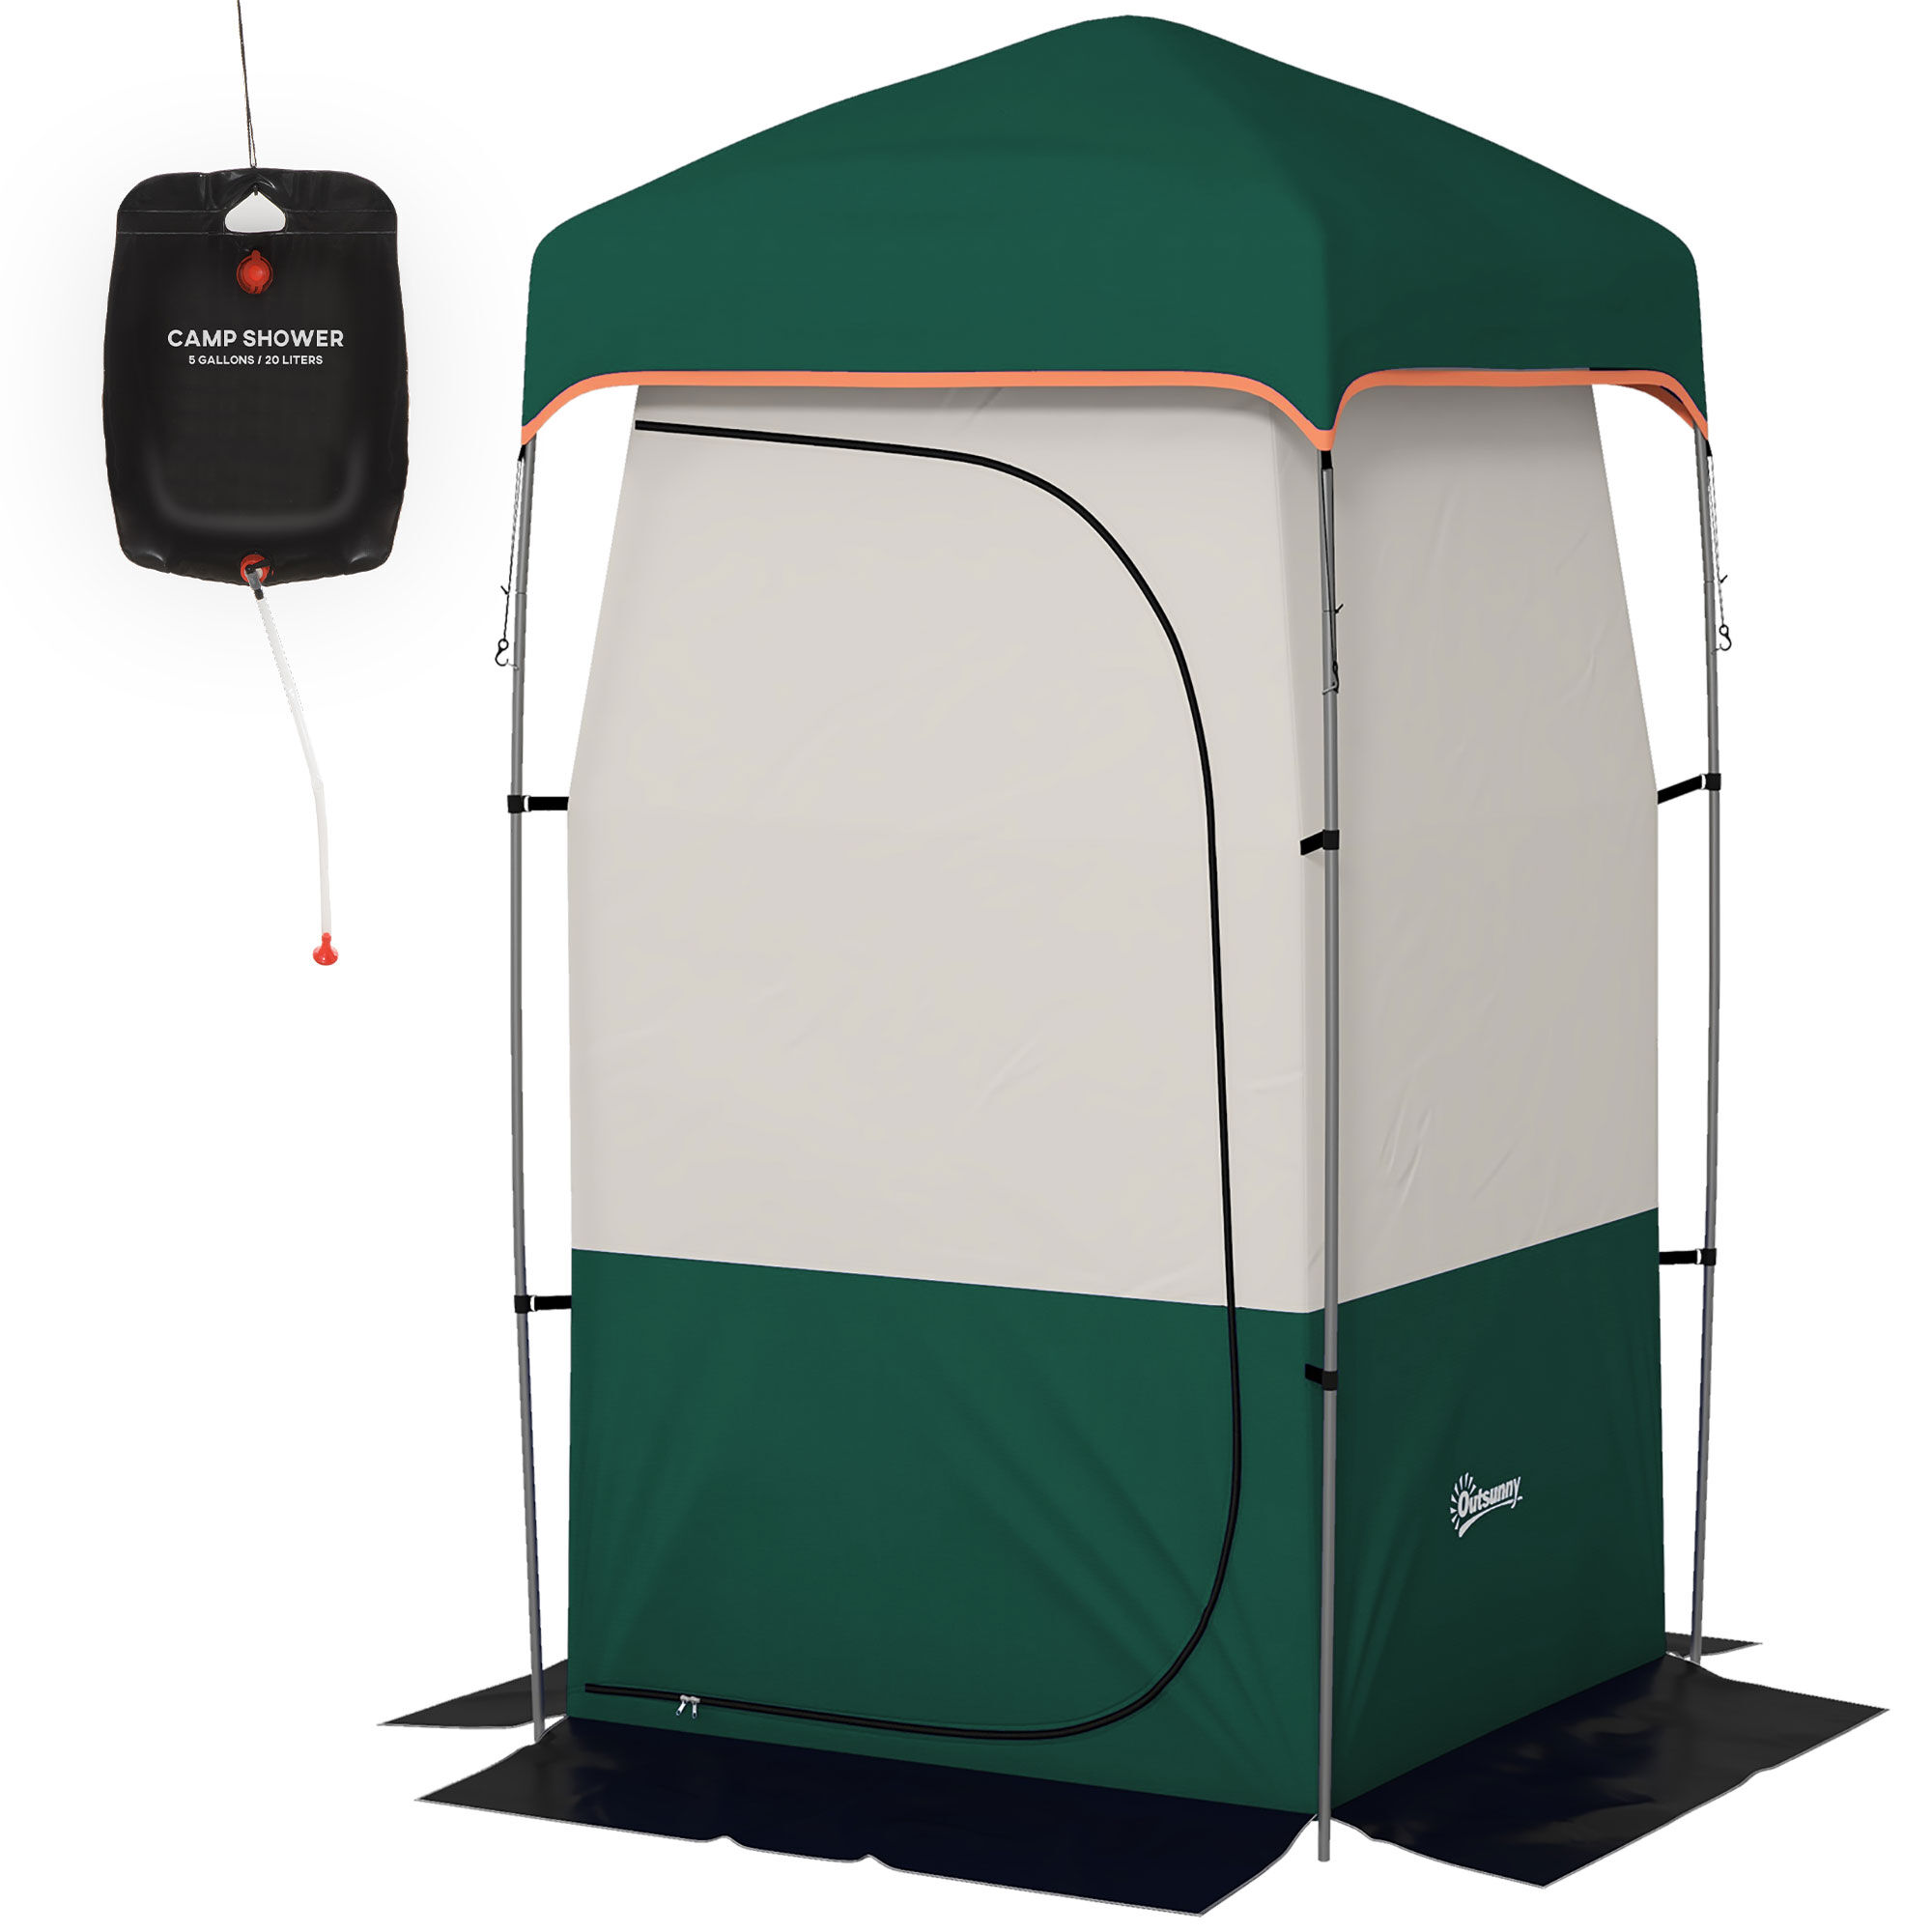 Outsunny Camping Shower Tent, Portable Privacy Shelter with Solar Shower Bag, Removable Floor and Carrying Bag, Green